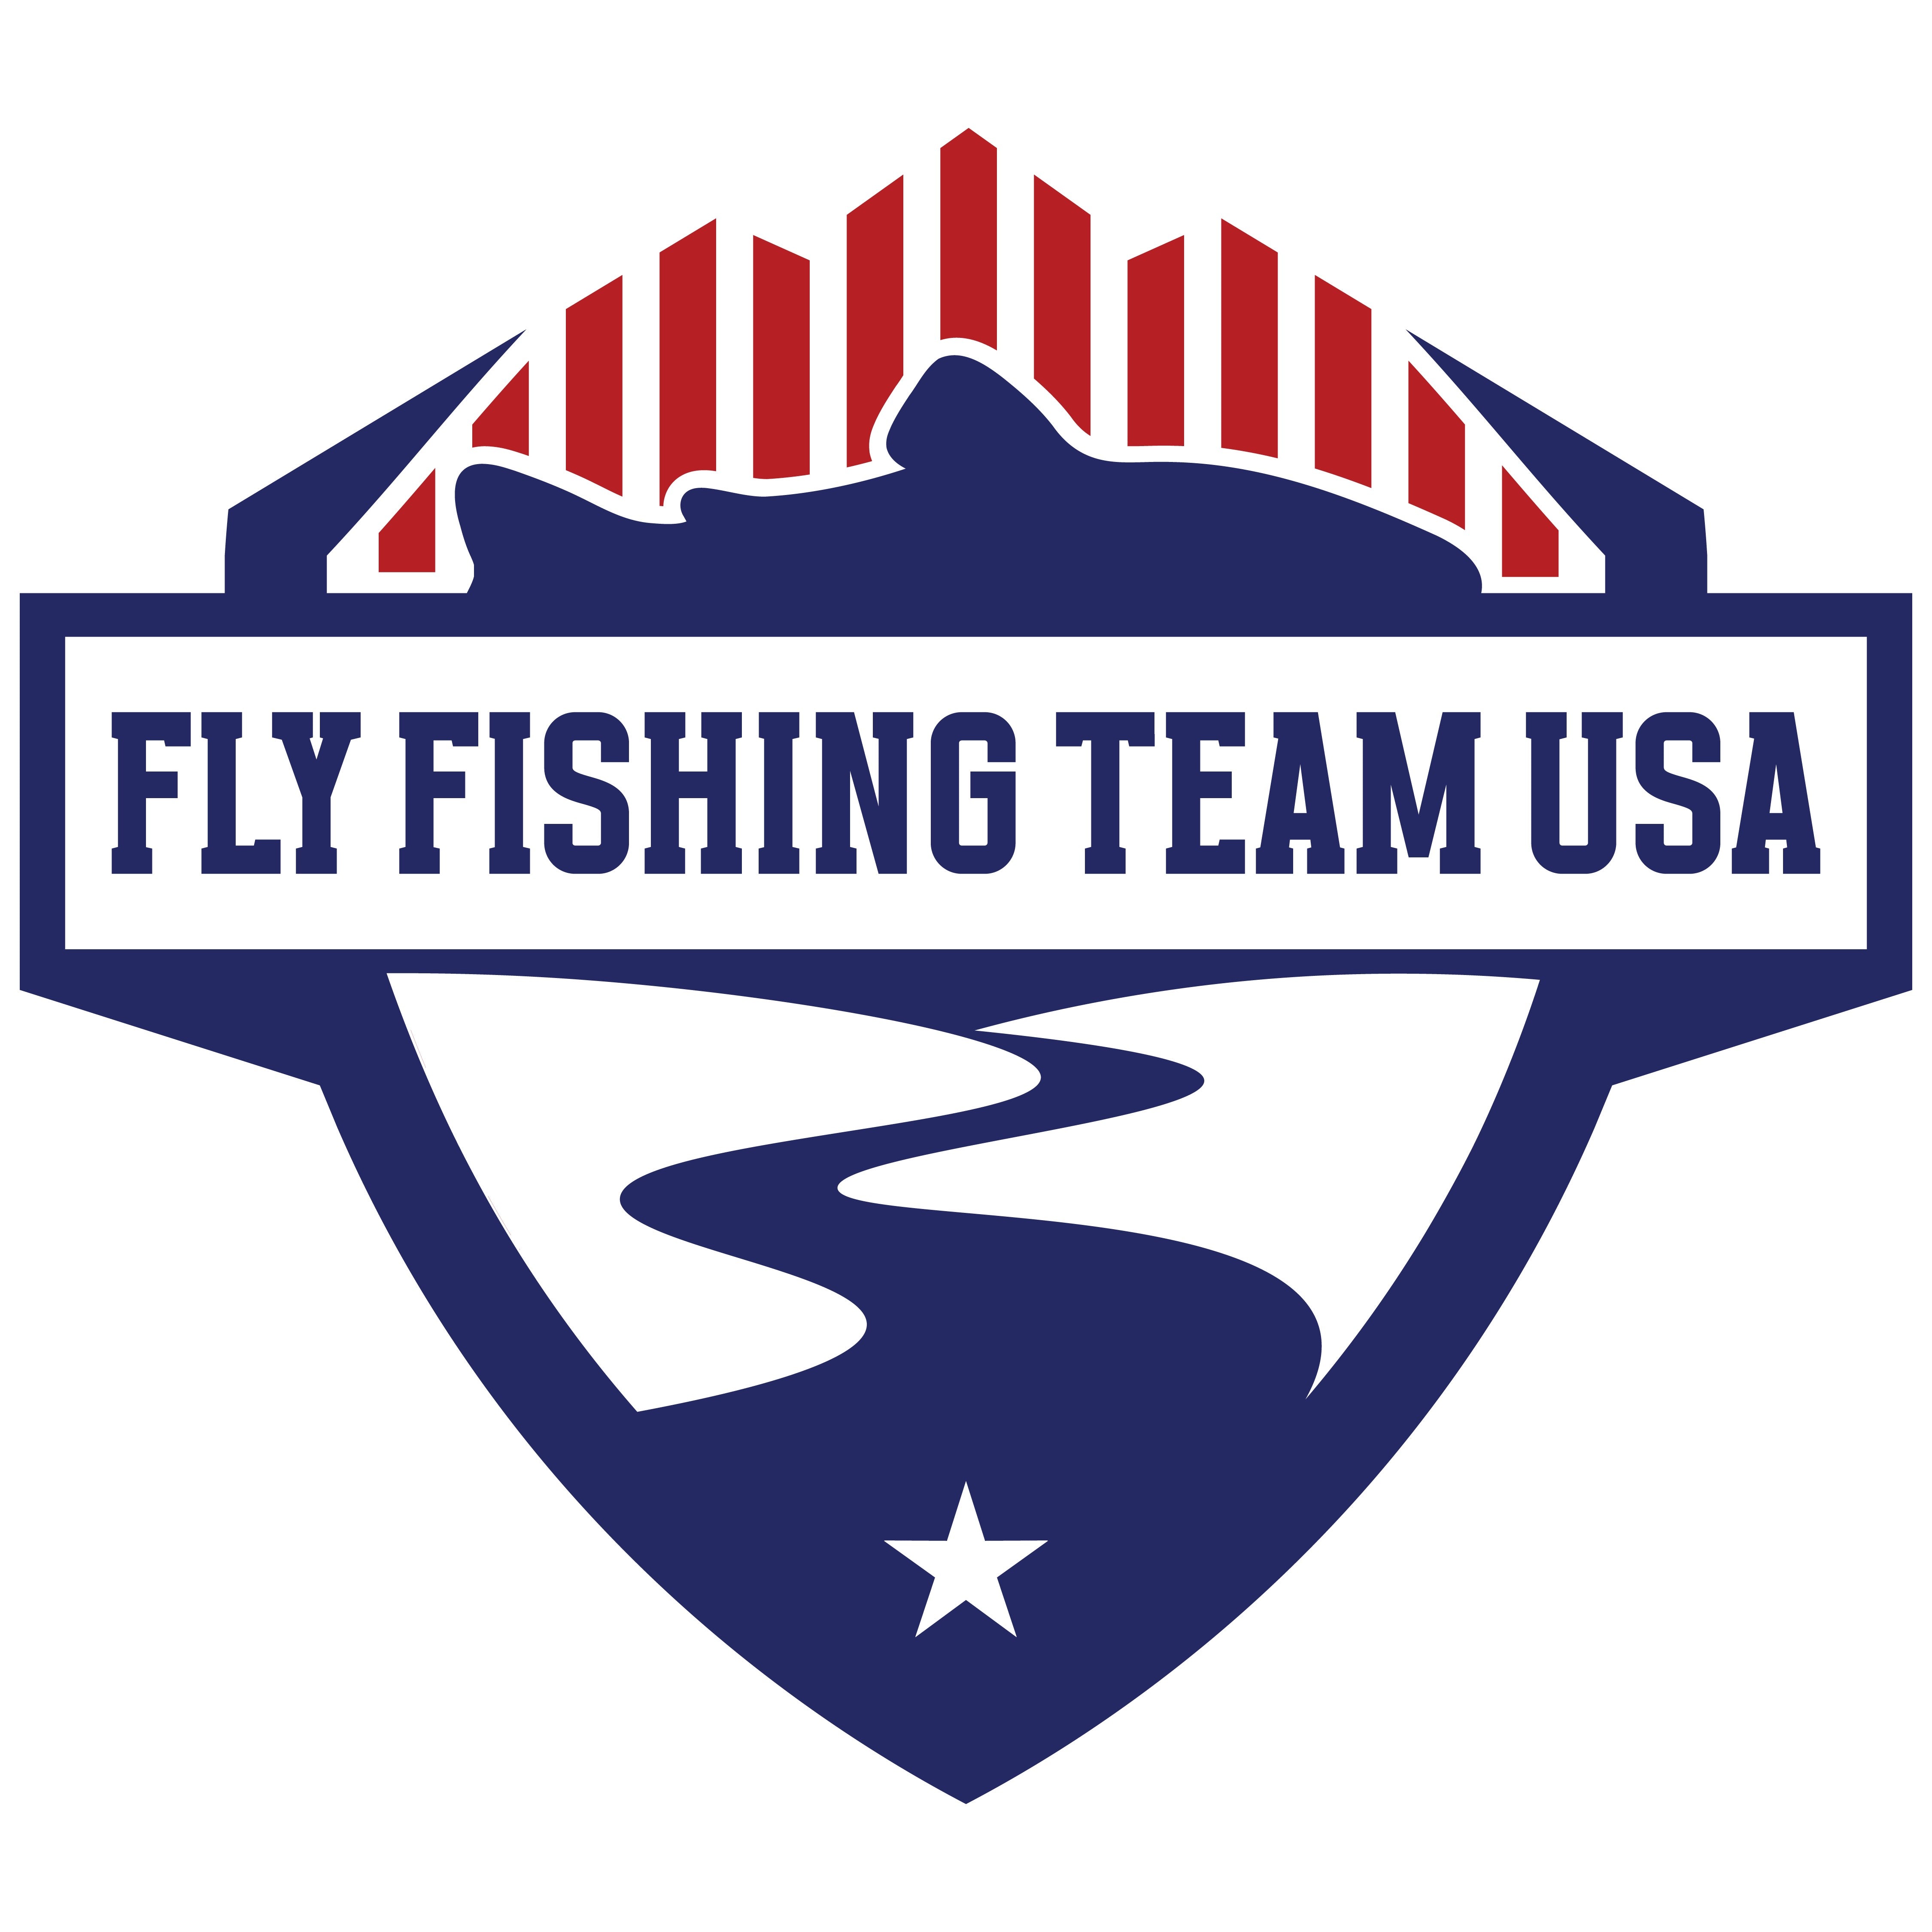 Team USA Competition Fishing Tactics and Tricks - Classroom